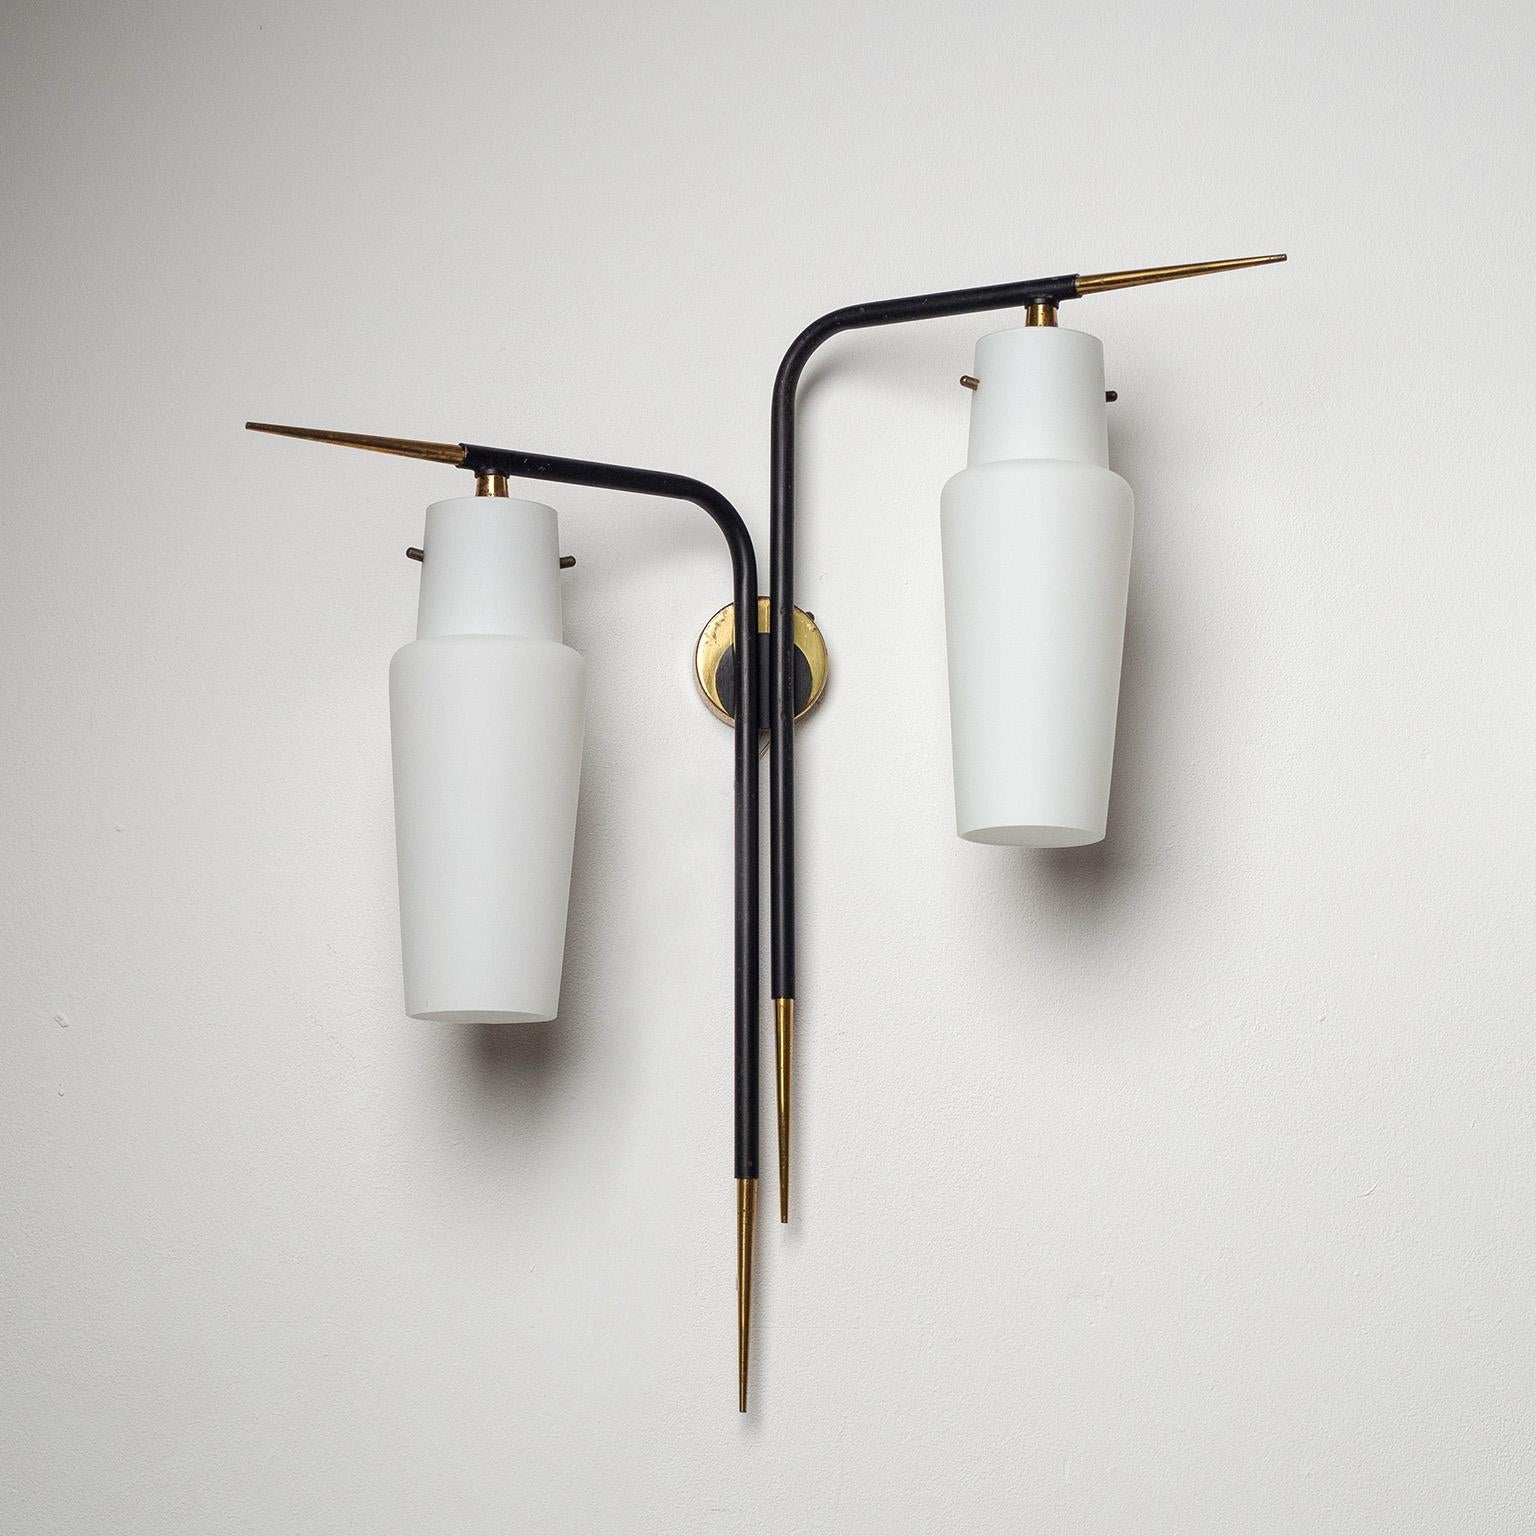 Mid-20th Century Pair of Large French Modernist Wall Lights, 1950s For Sale